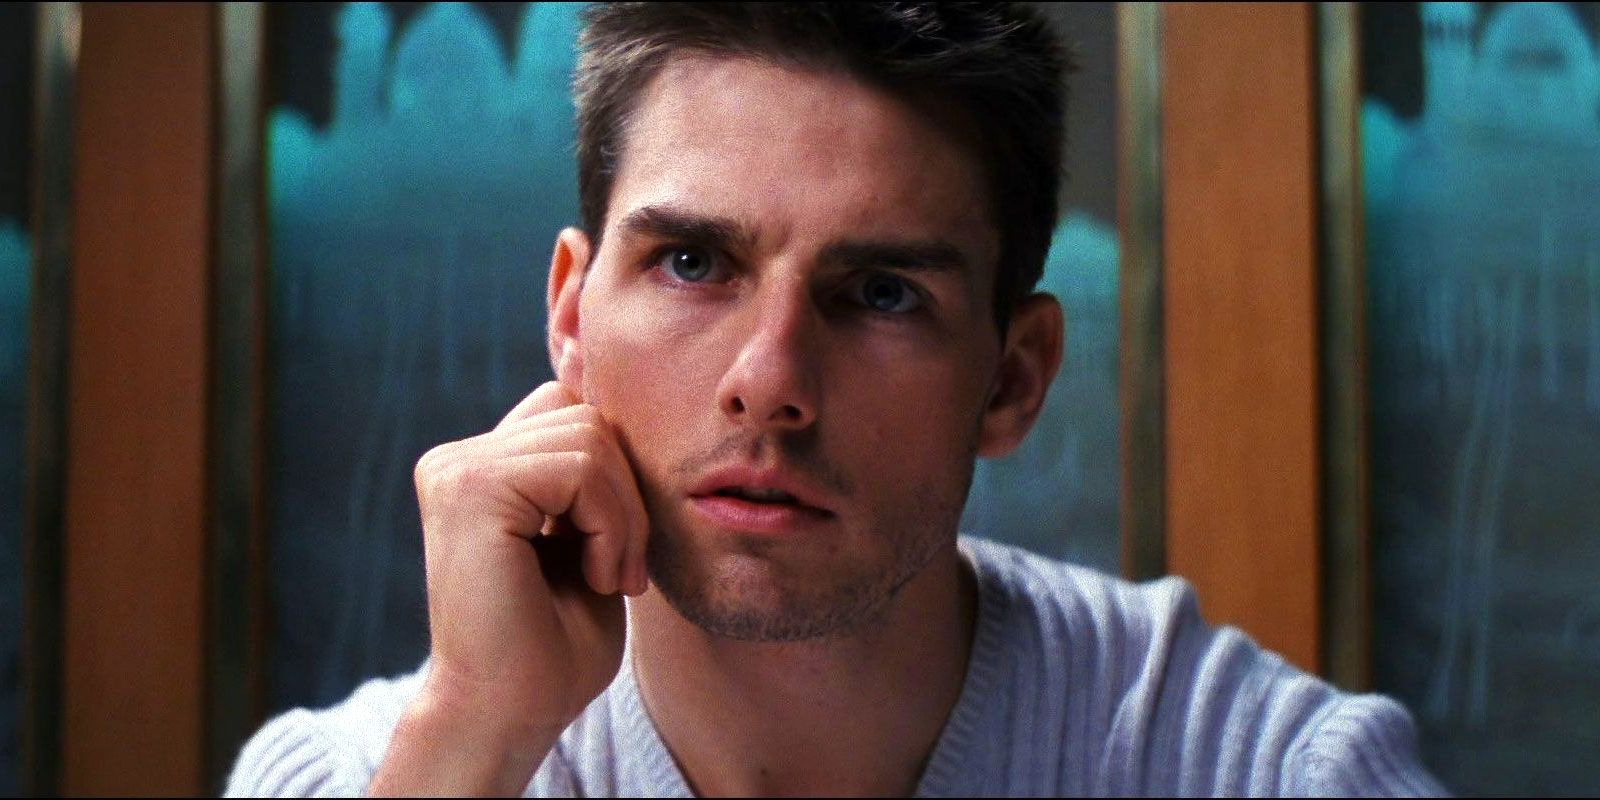 Ethan Hunt ponders his next move in the 1996 film Mission: Impossible.